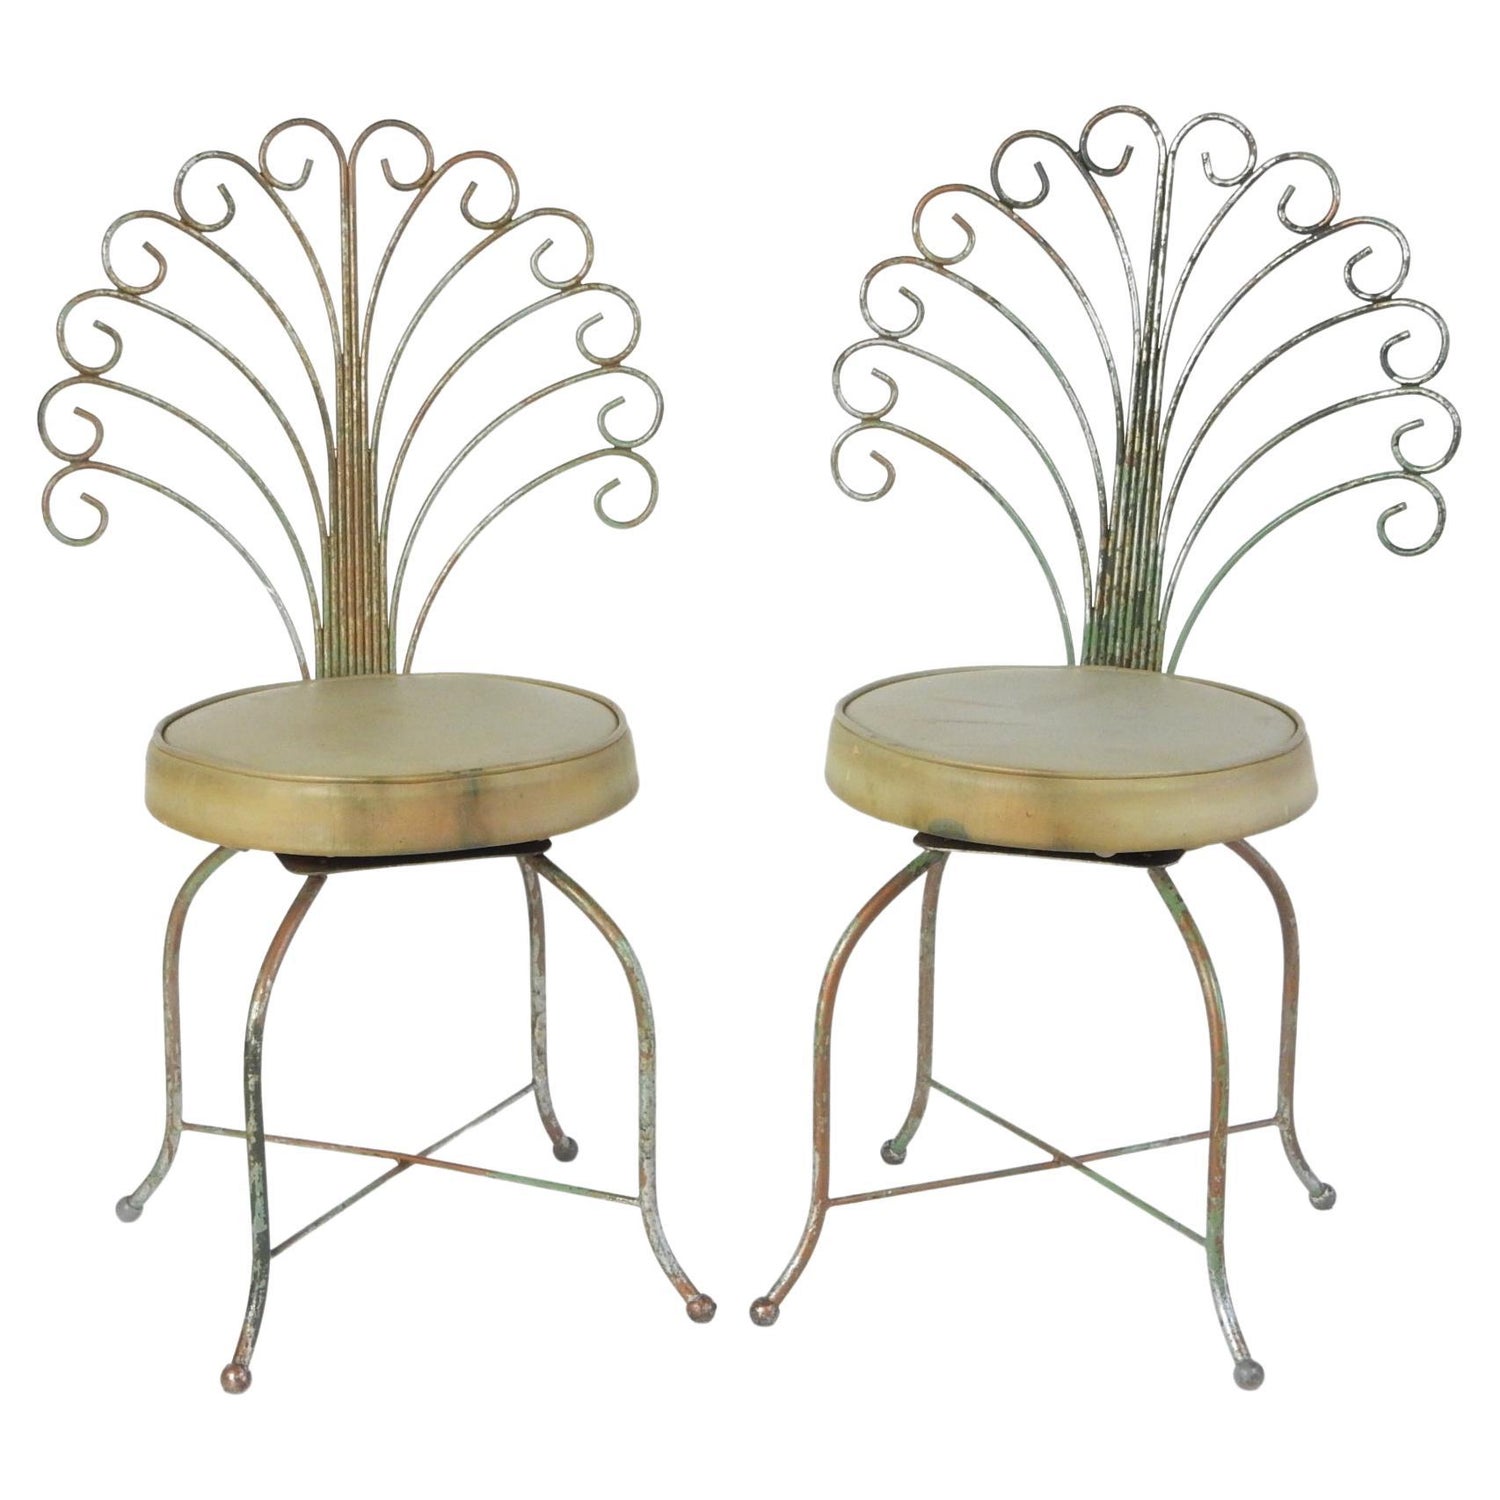 Pair, 1960's Peacock Garden or Vanity Chairs For Sale at 1stDibs